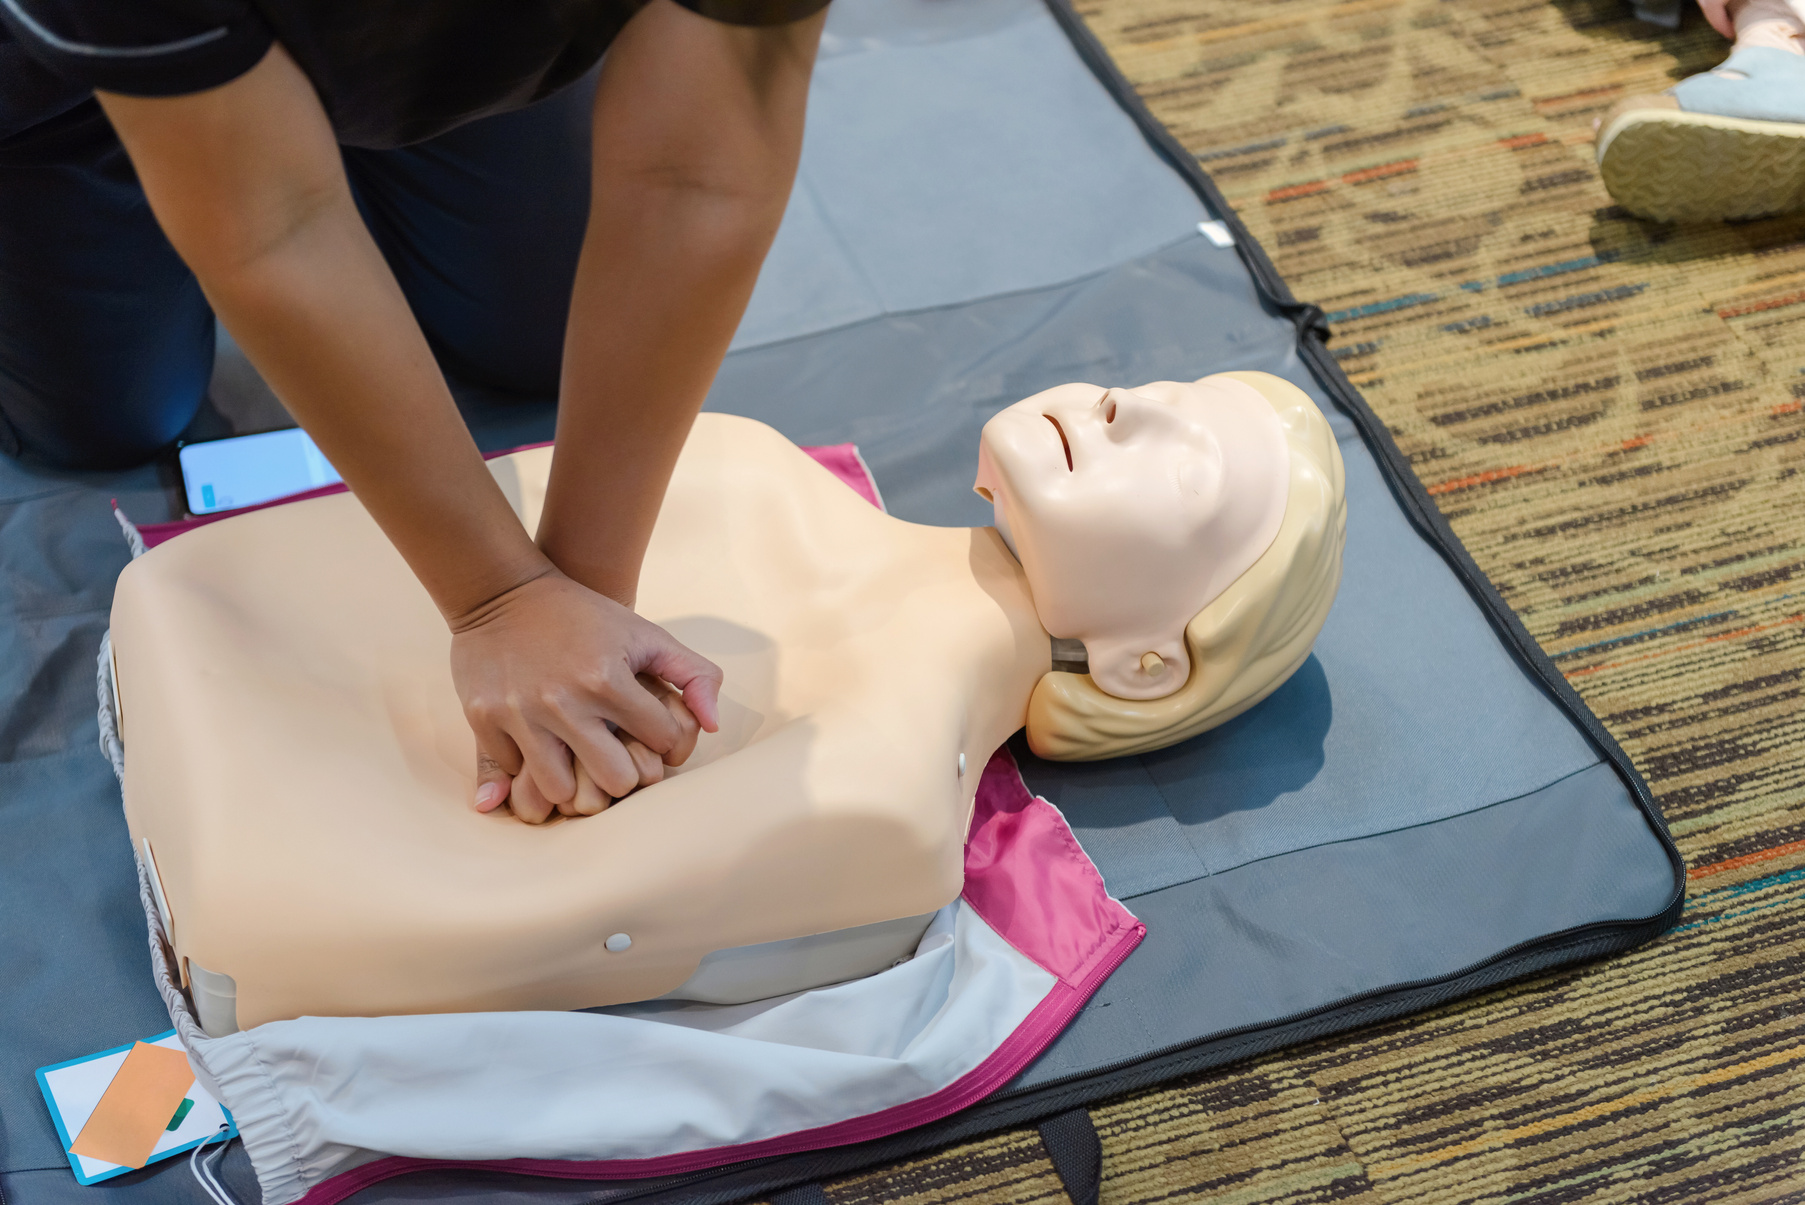 CPR First Aid Training with CPR dummy in the class. Demonstrating chest compressions concept.